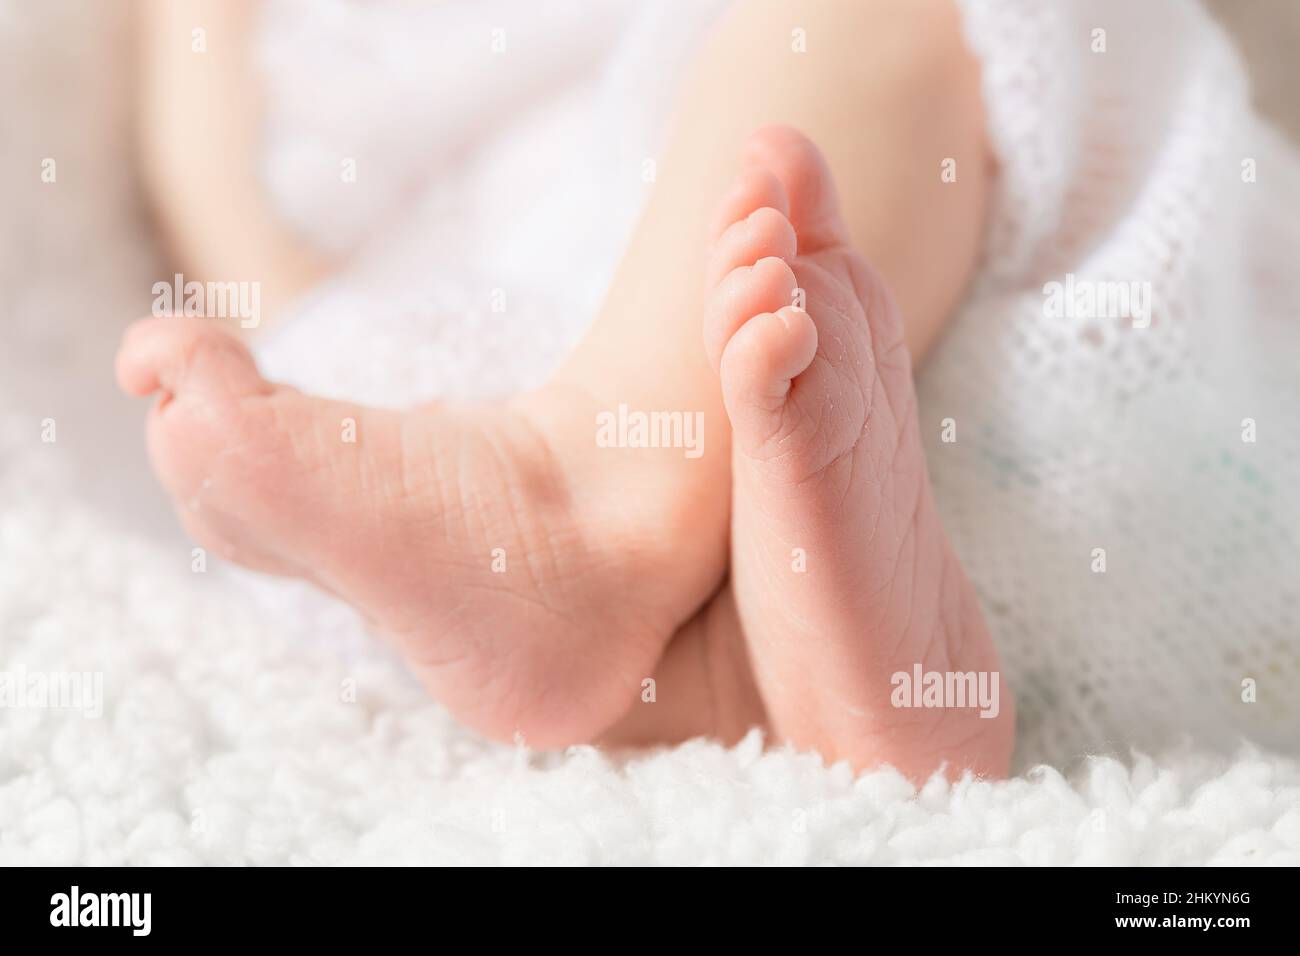 Baby legs close up on a light background Stock Photo